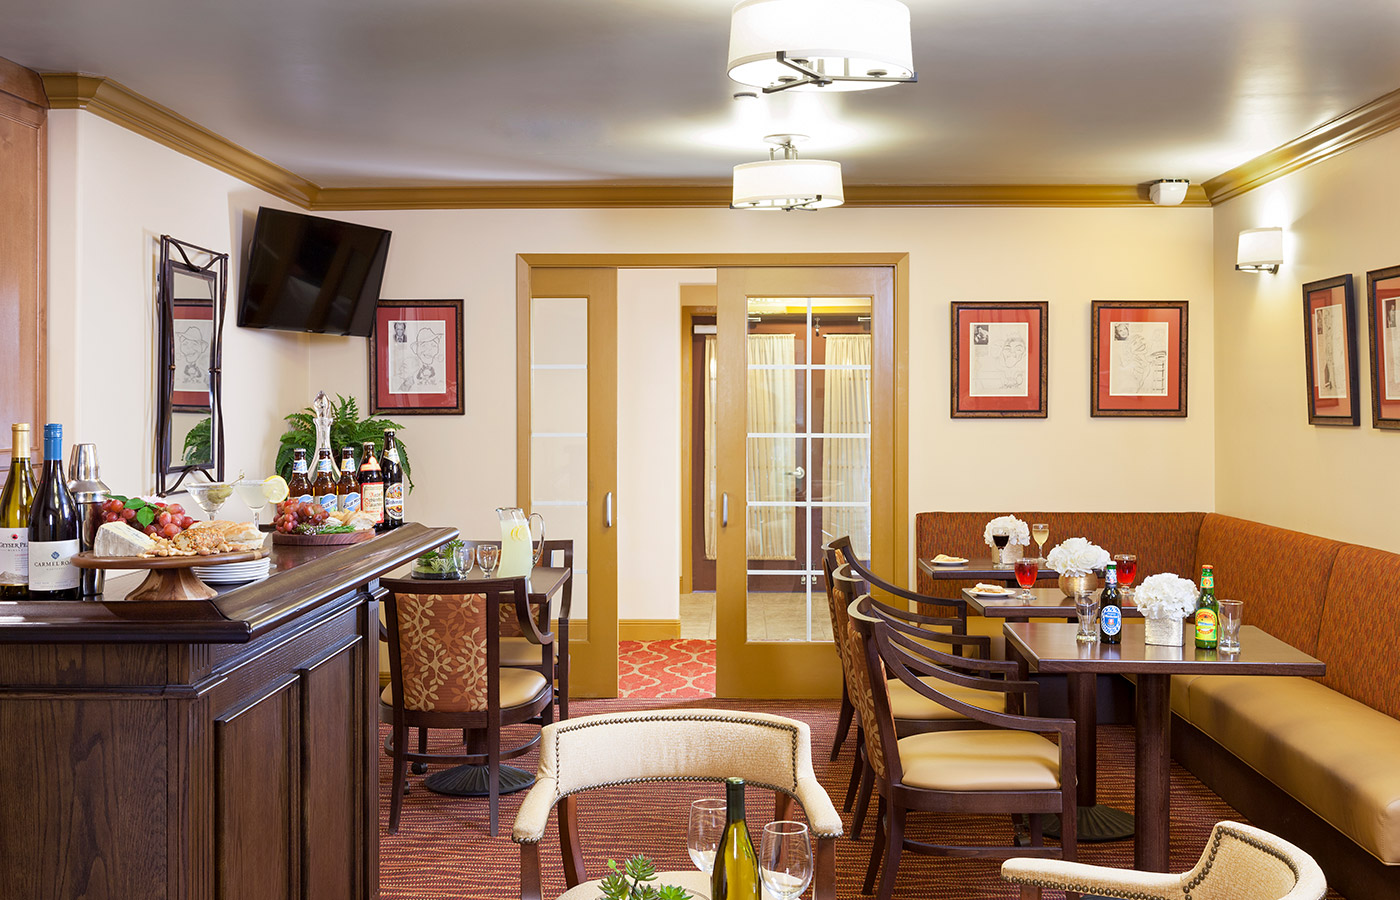 The Club room of the residence, with a vast array of beverage available 